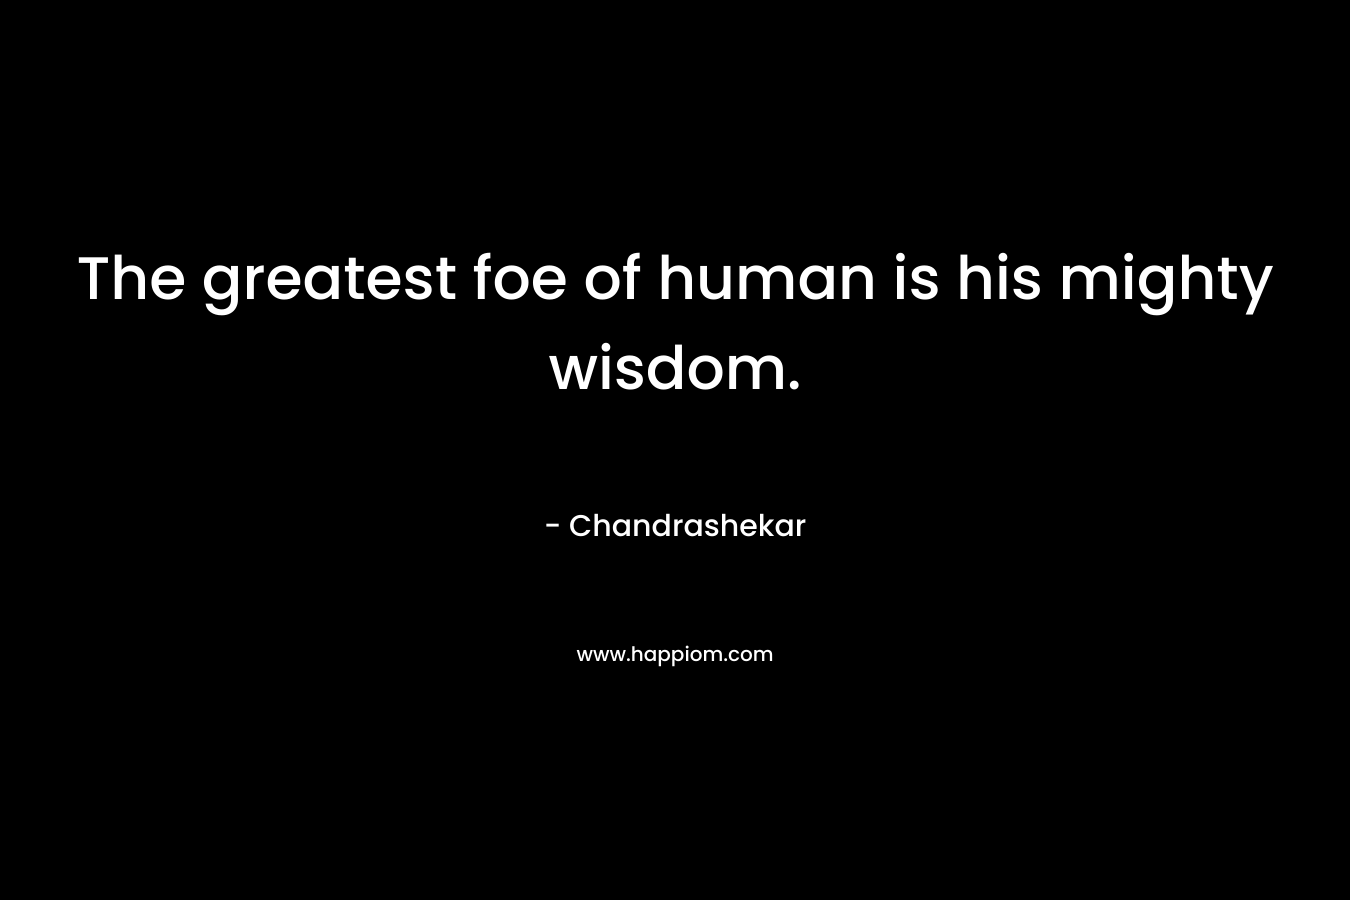 The greatest foe of human is his mighty wisdom.